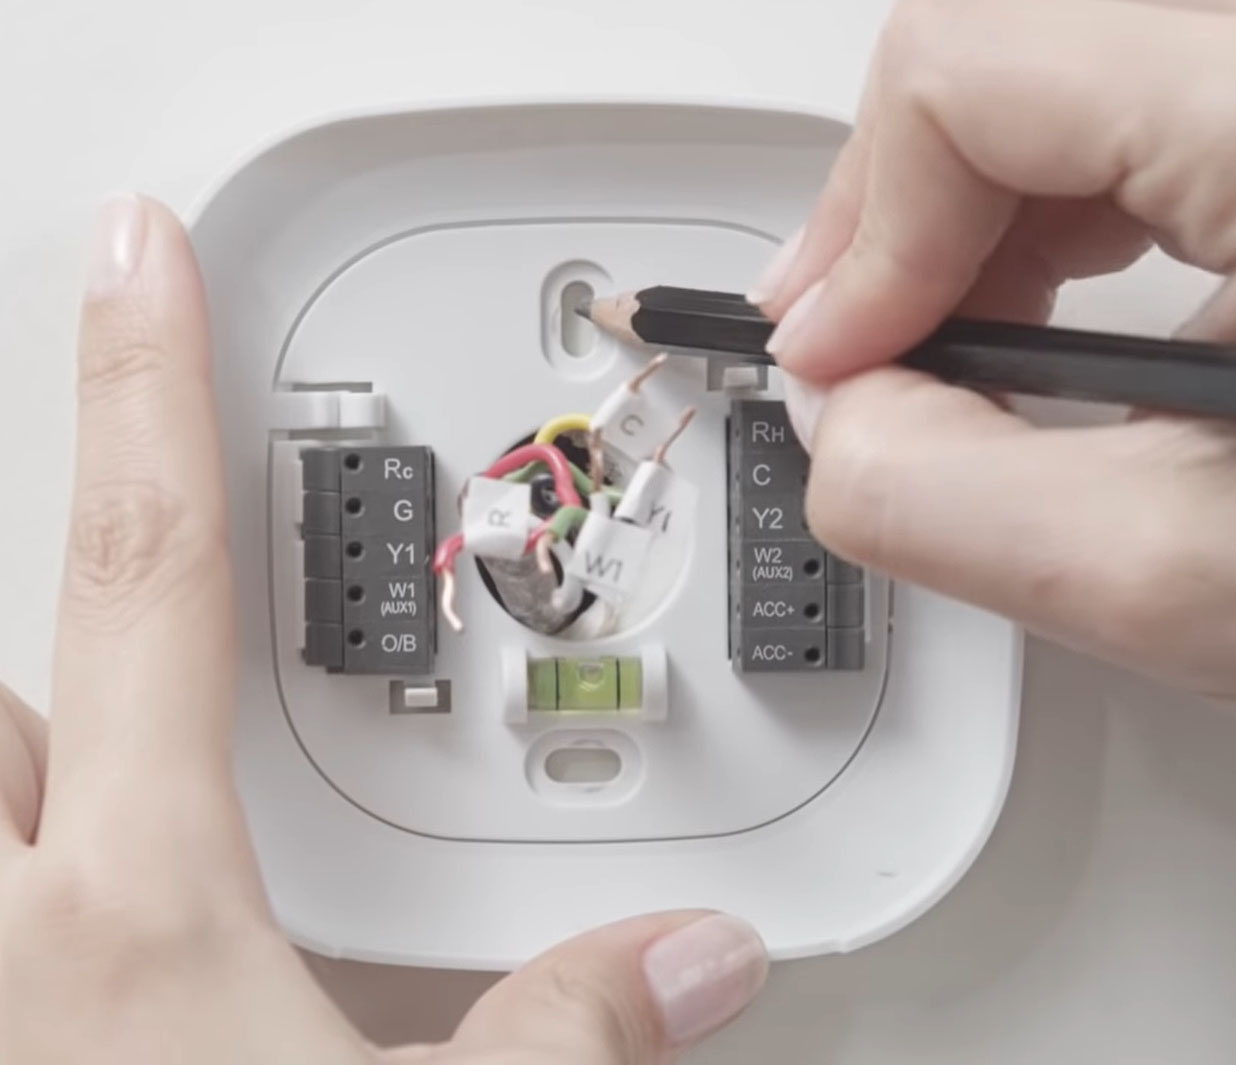 How to Install ecobee3 Smart Thermostat